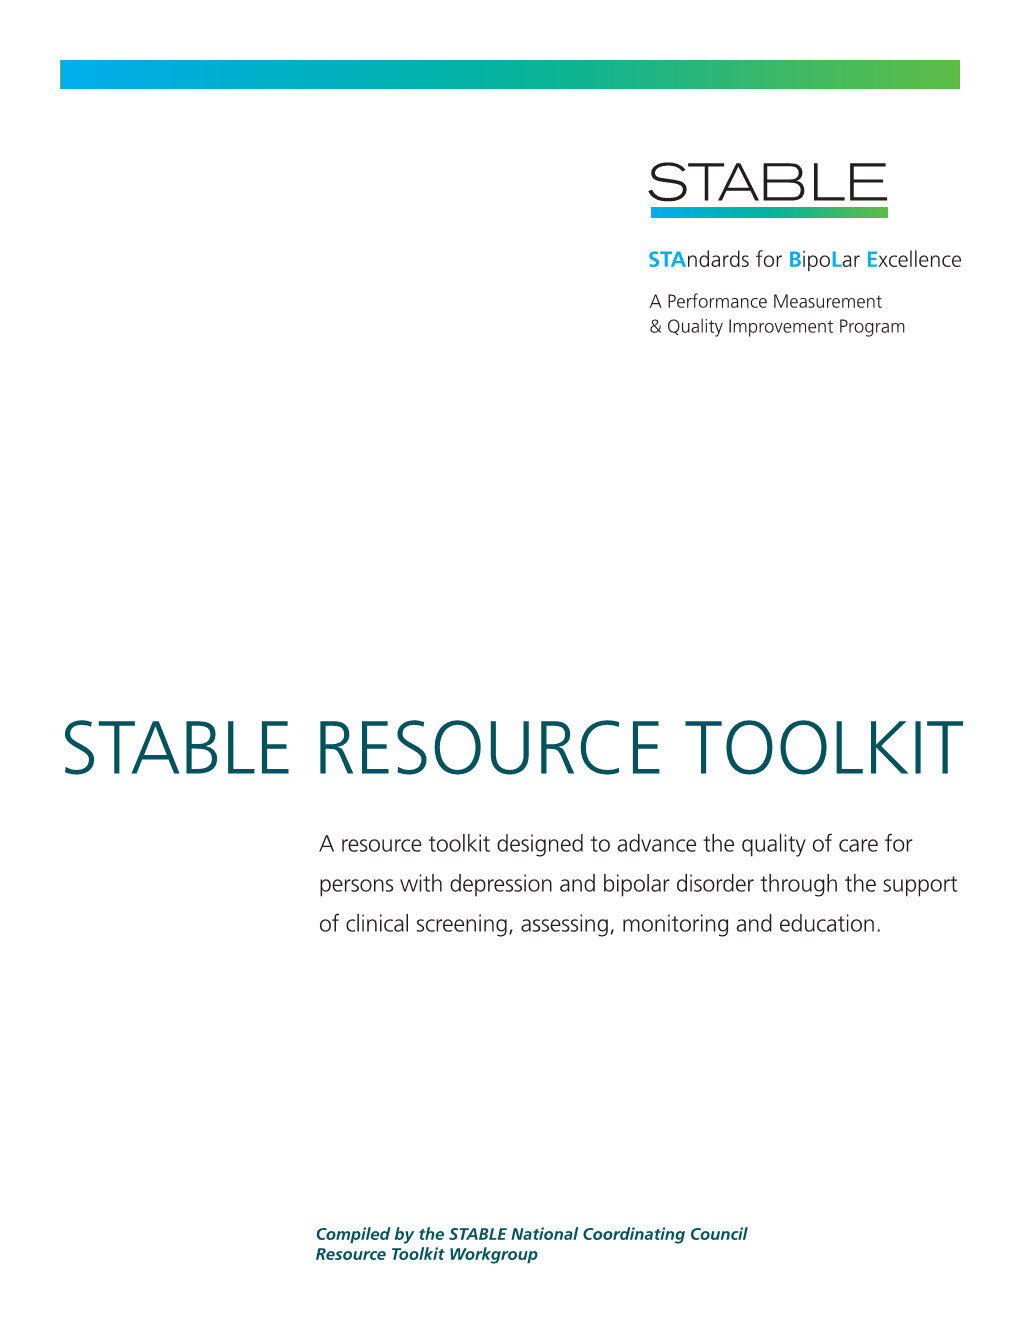 Stable Resource Toolkit